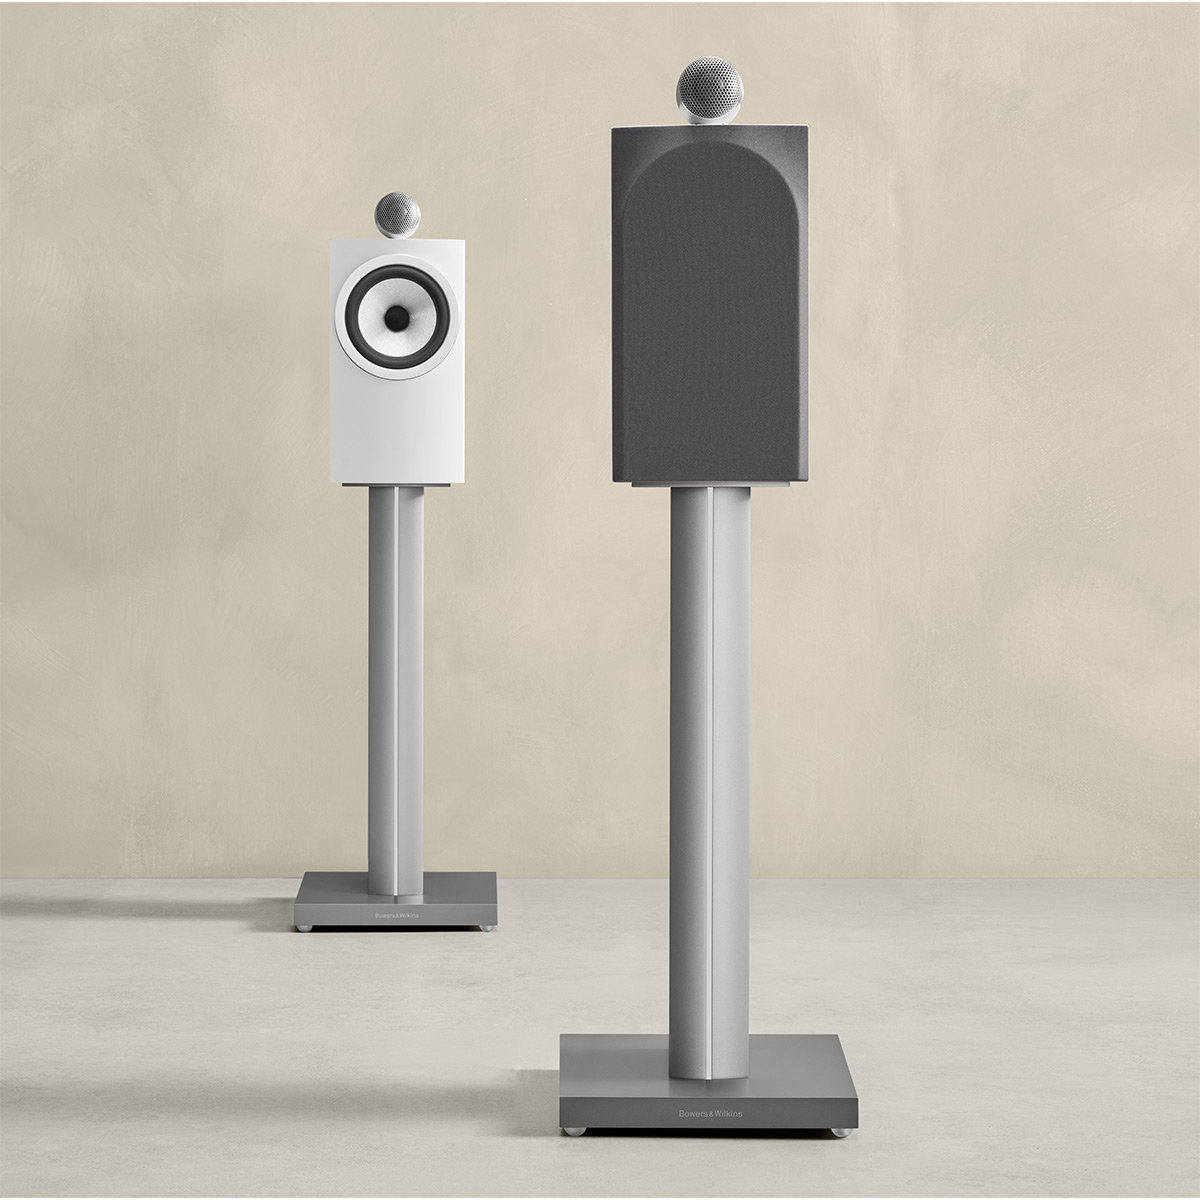 The best speaker stands of 2023